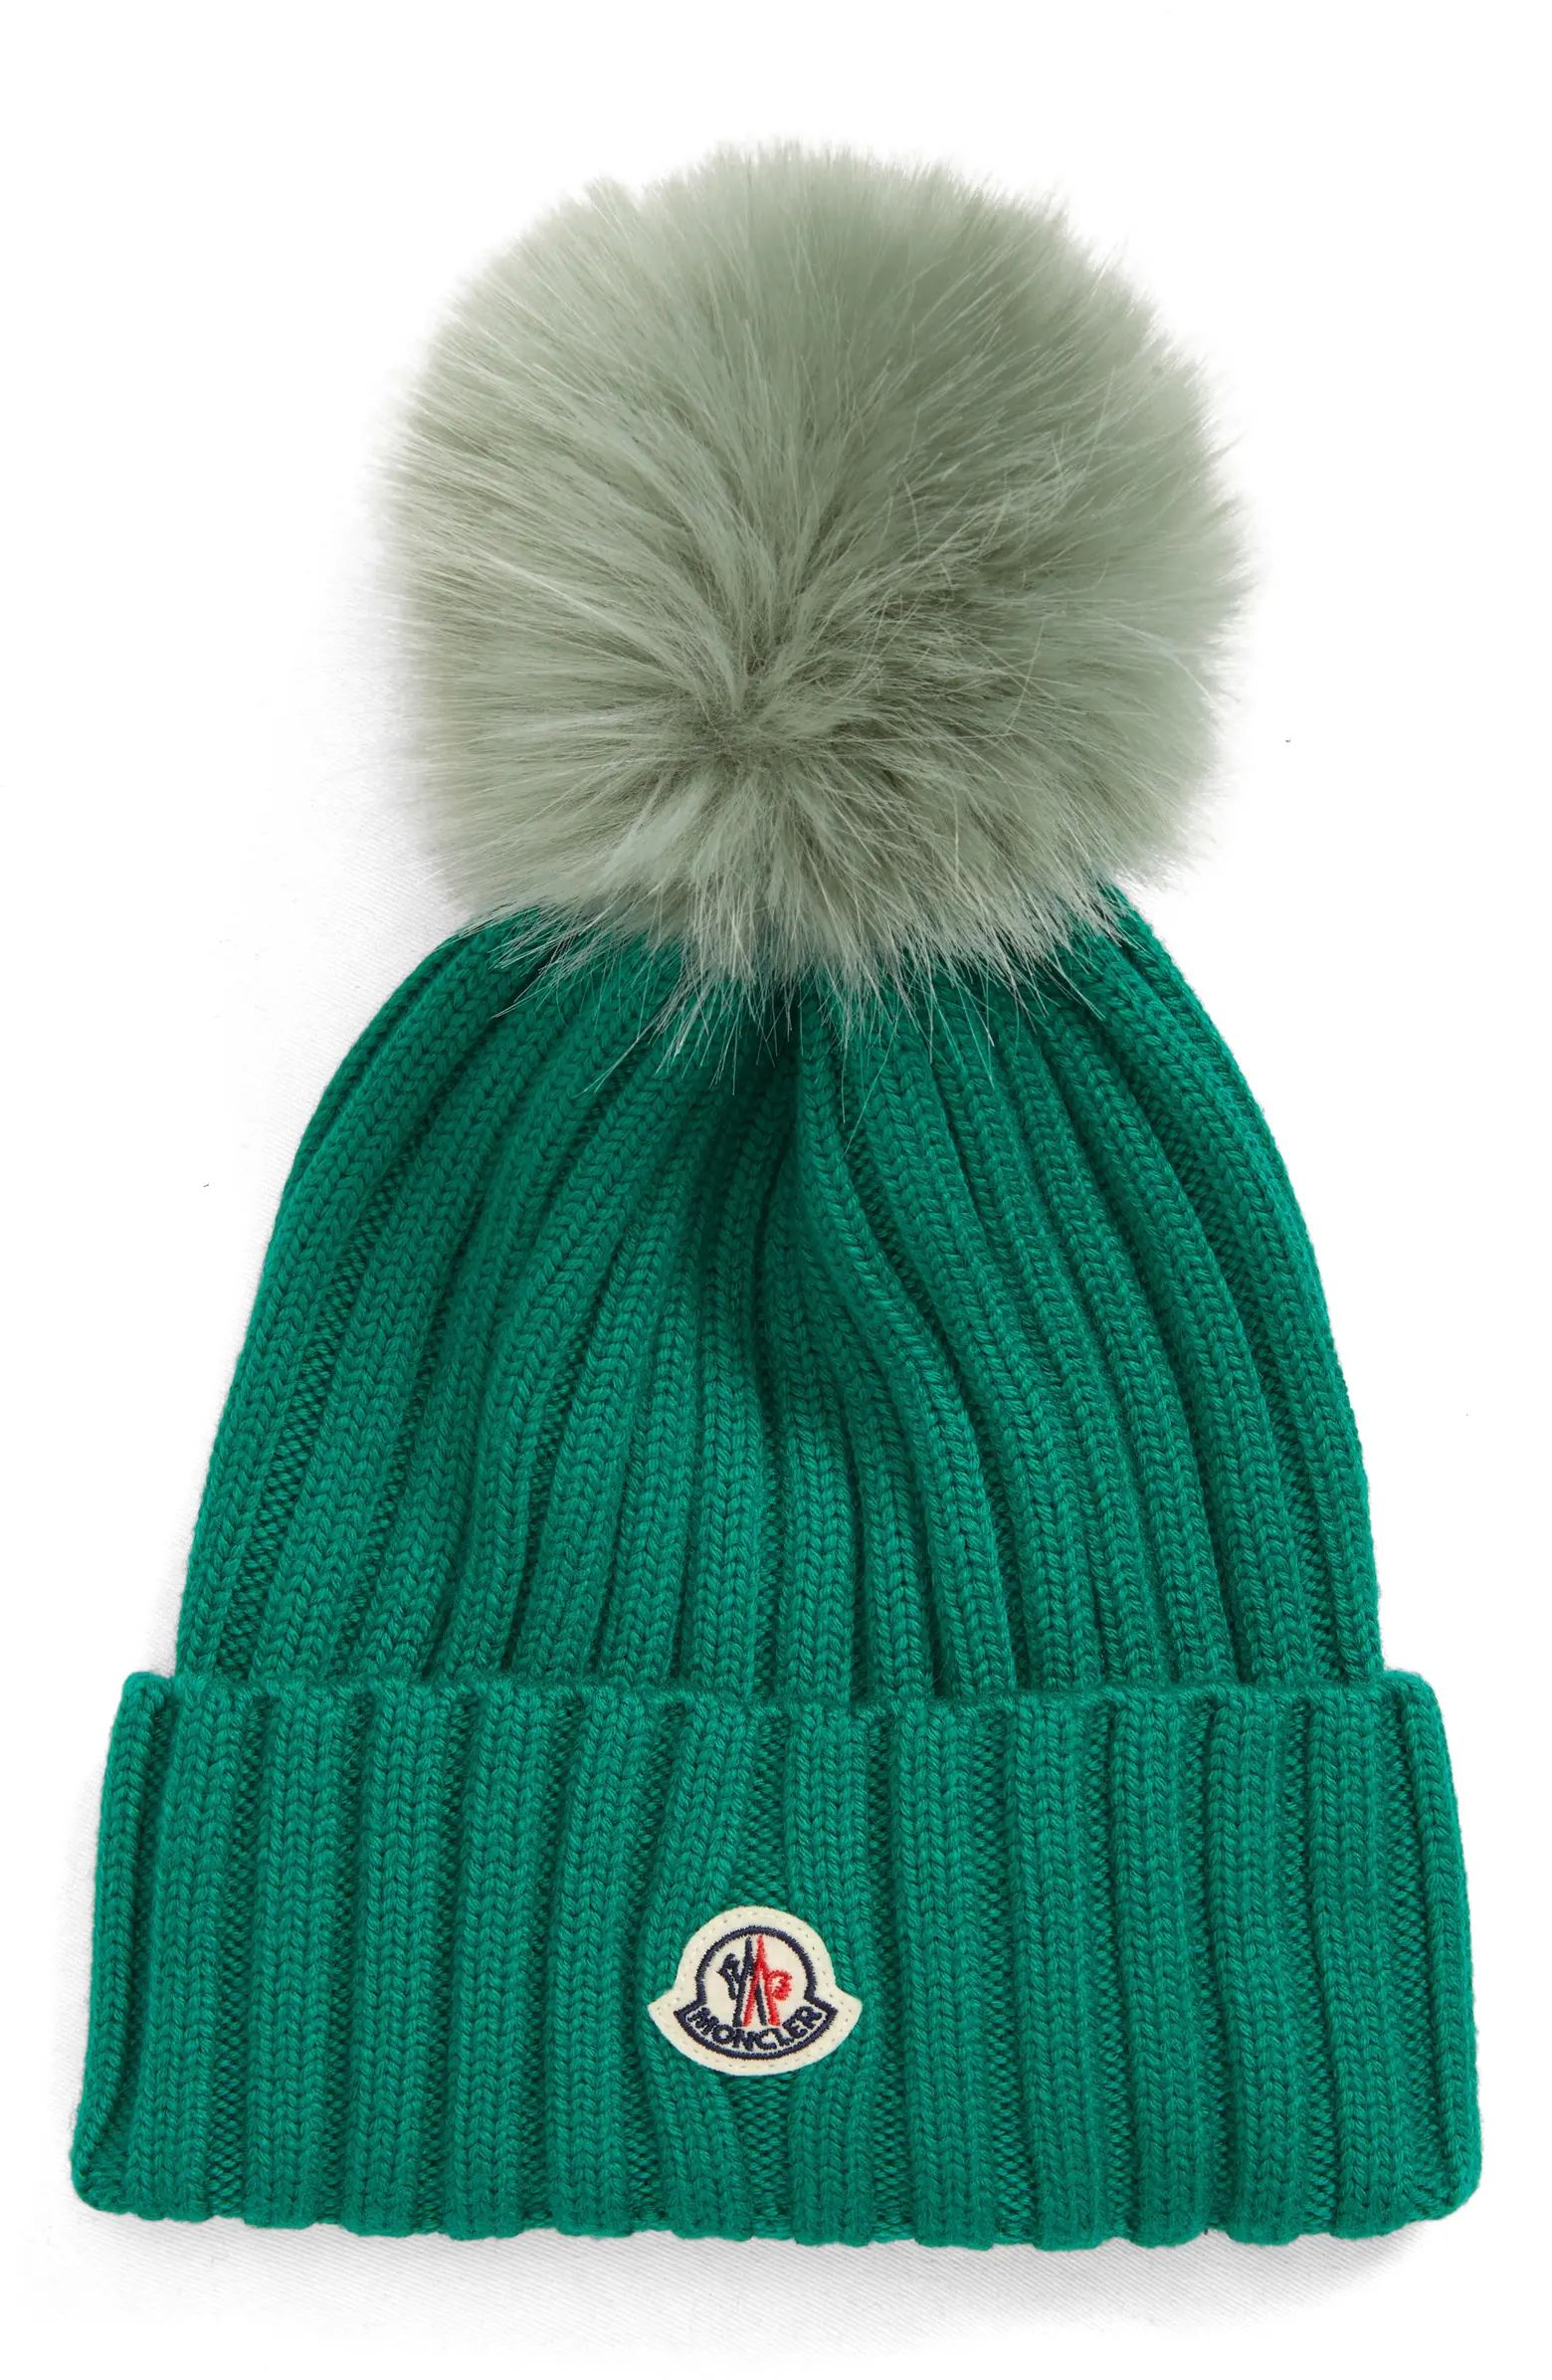 Moncler Wool Rib Beanie with Faux Fur Pompom | Nordstrom | Nordstrom